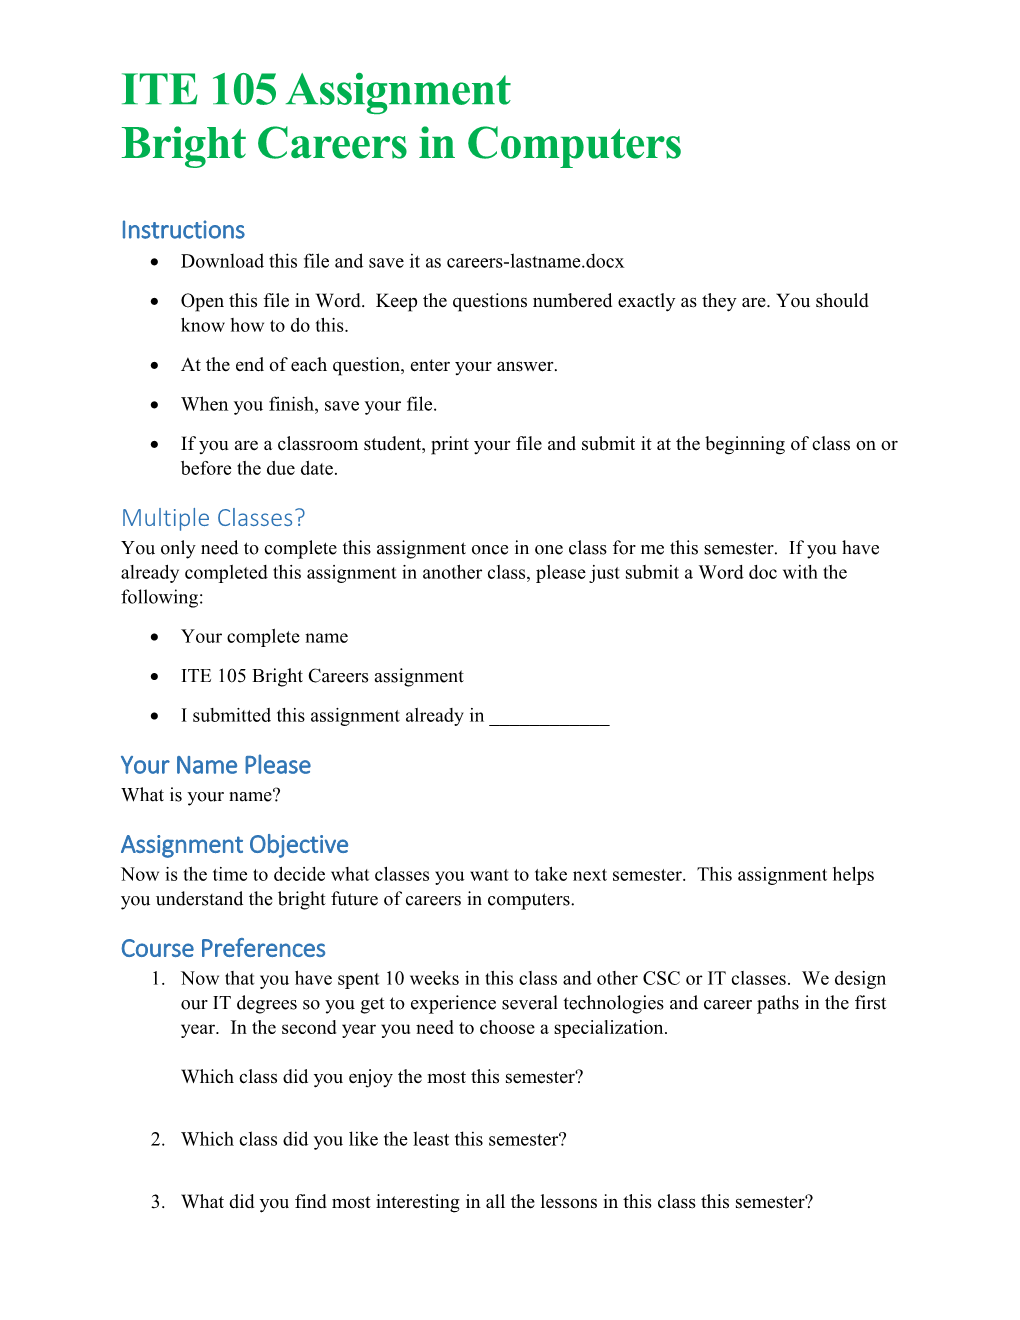 Bright Careers in Computers Assignment